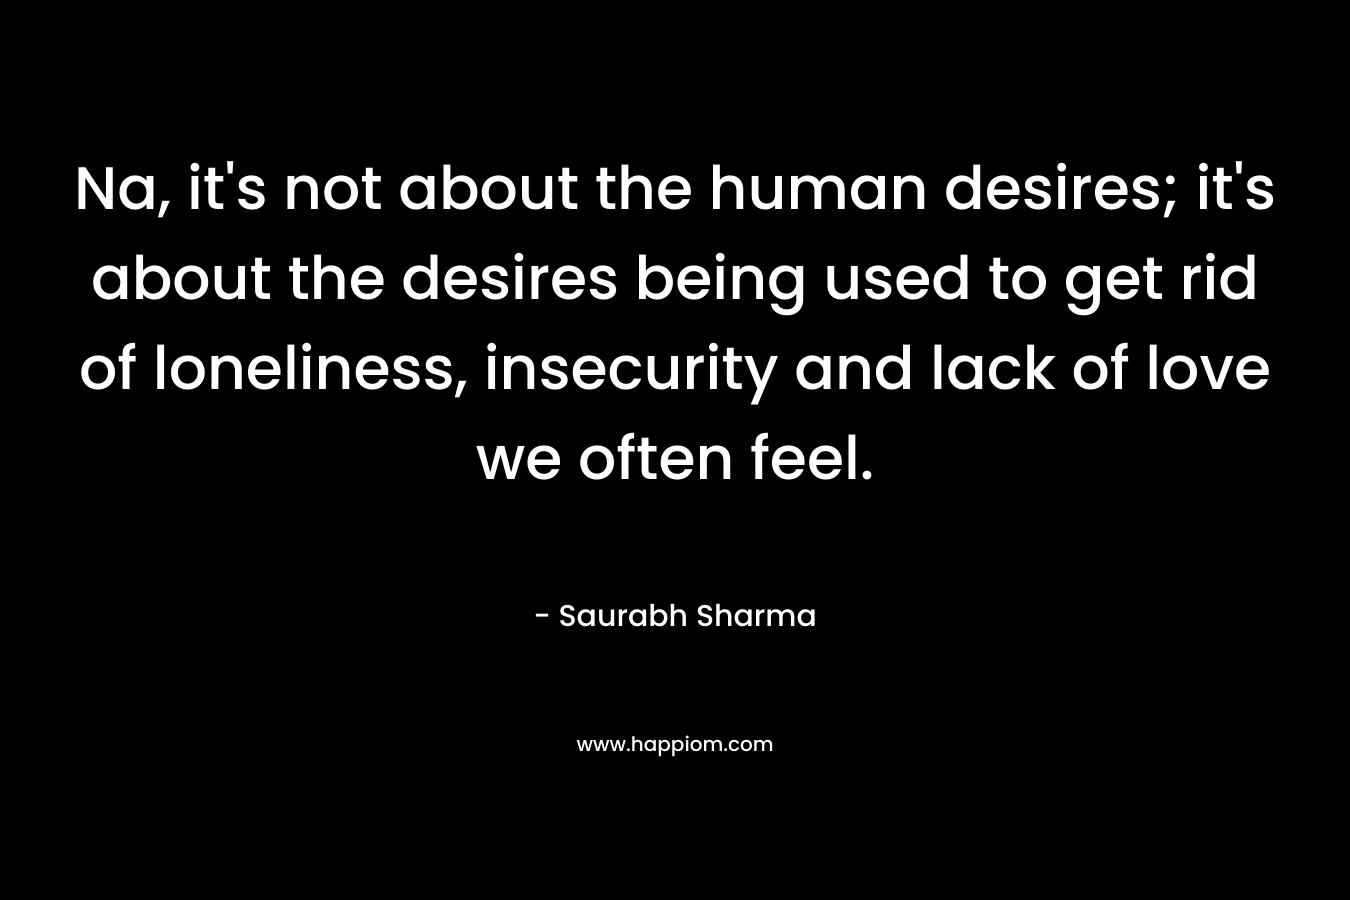 Na, it's not about the human desires; it's about the desires being used to get rid of loneliness, insecurity and lack of love we often feel.